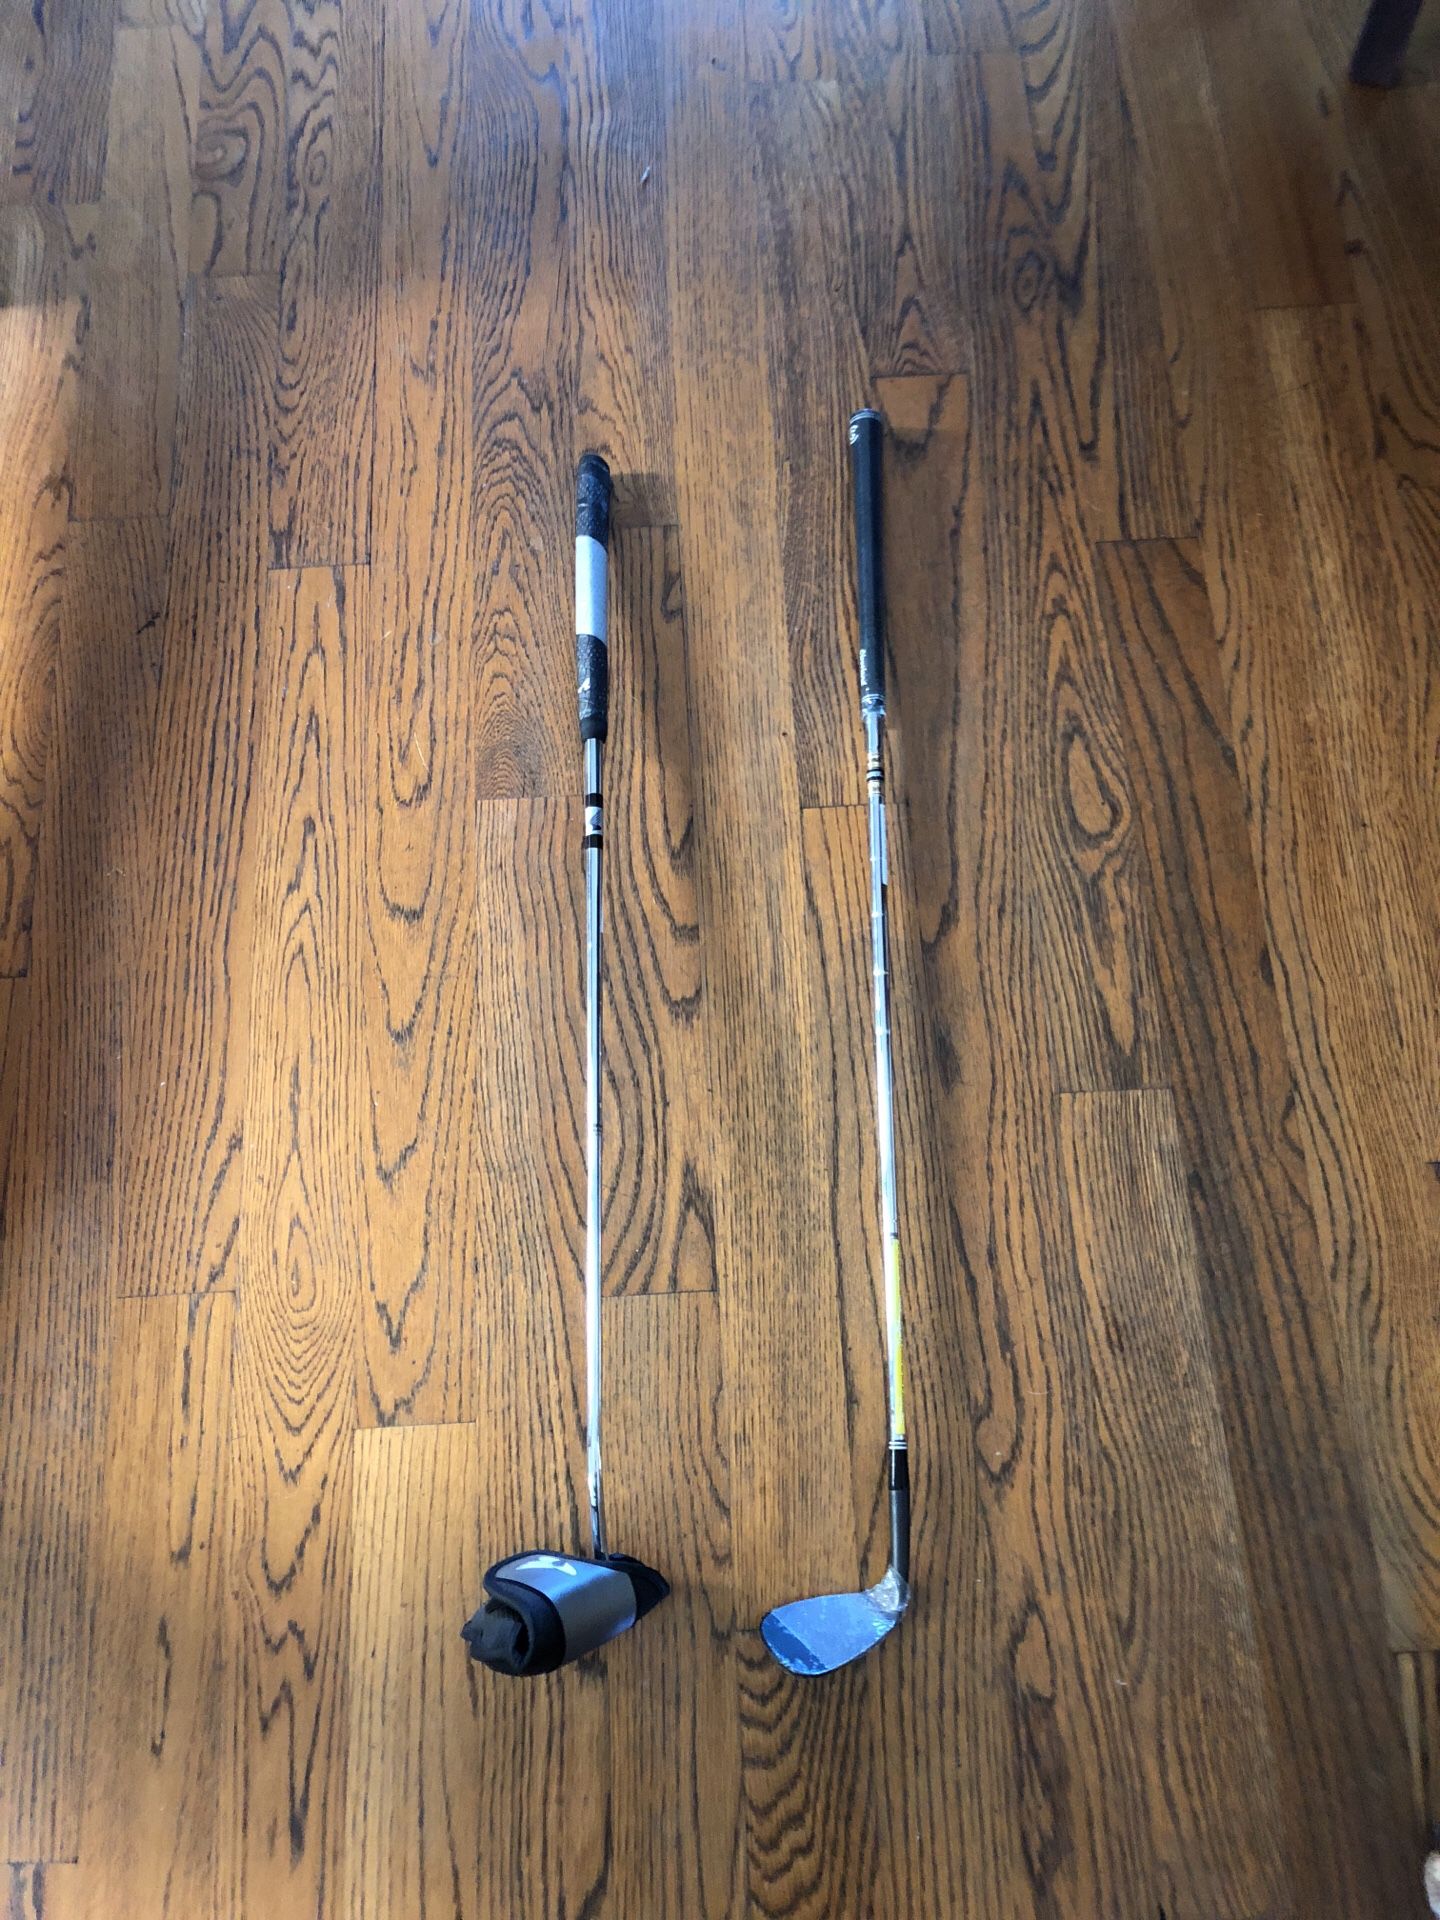 Cleveland Golf Clubs For Sale